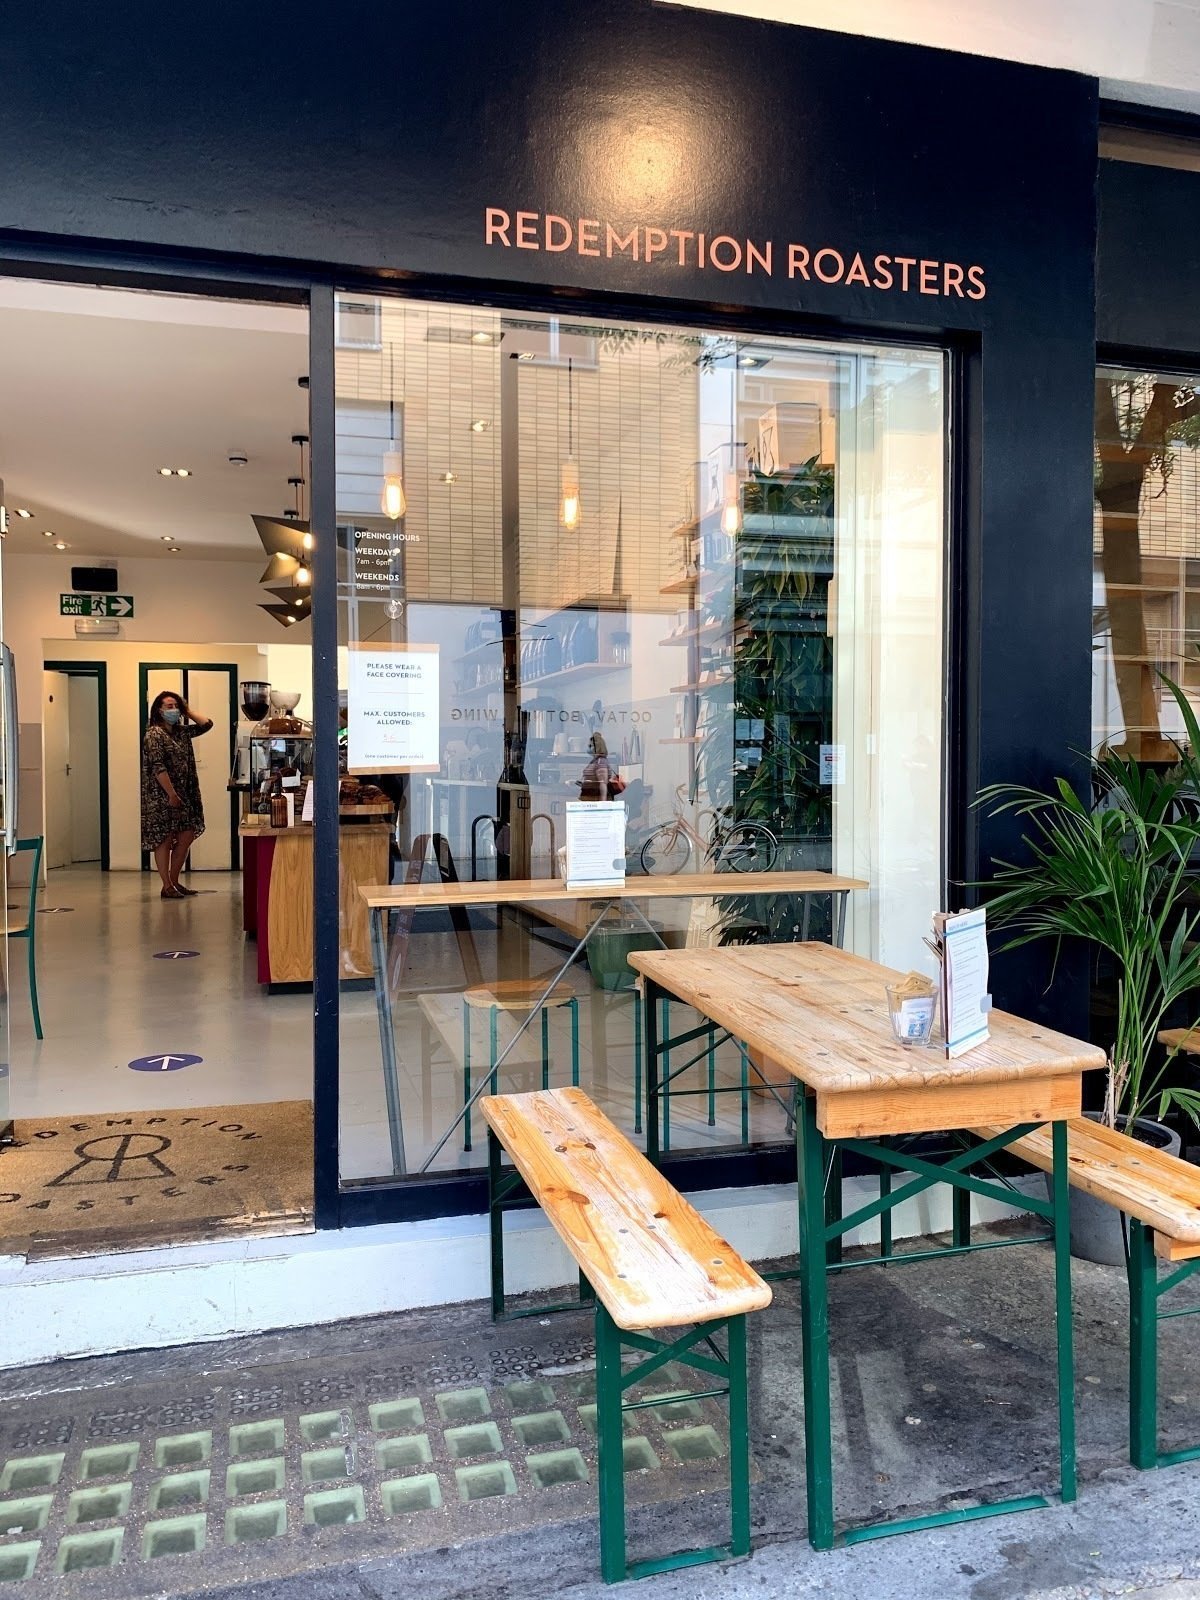 <span class="translation_missing" title="translation missing: en.meta.location_title, location_name: Redemption Roasters - Bloomsbury, city: London">Location Title</span>